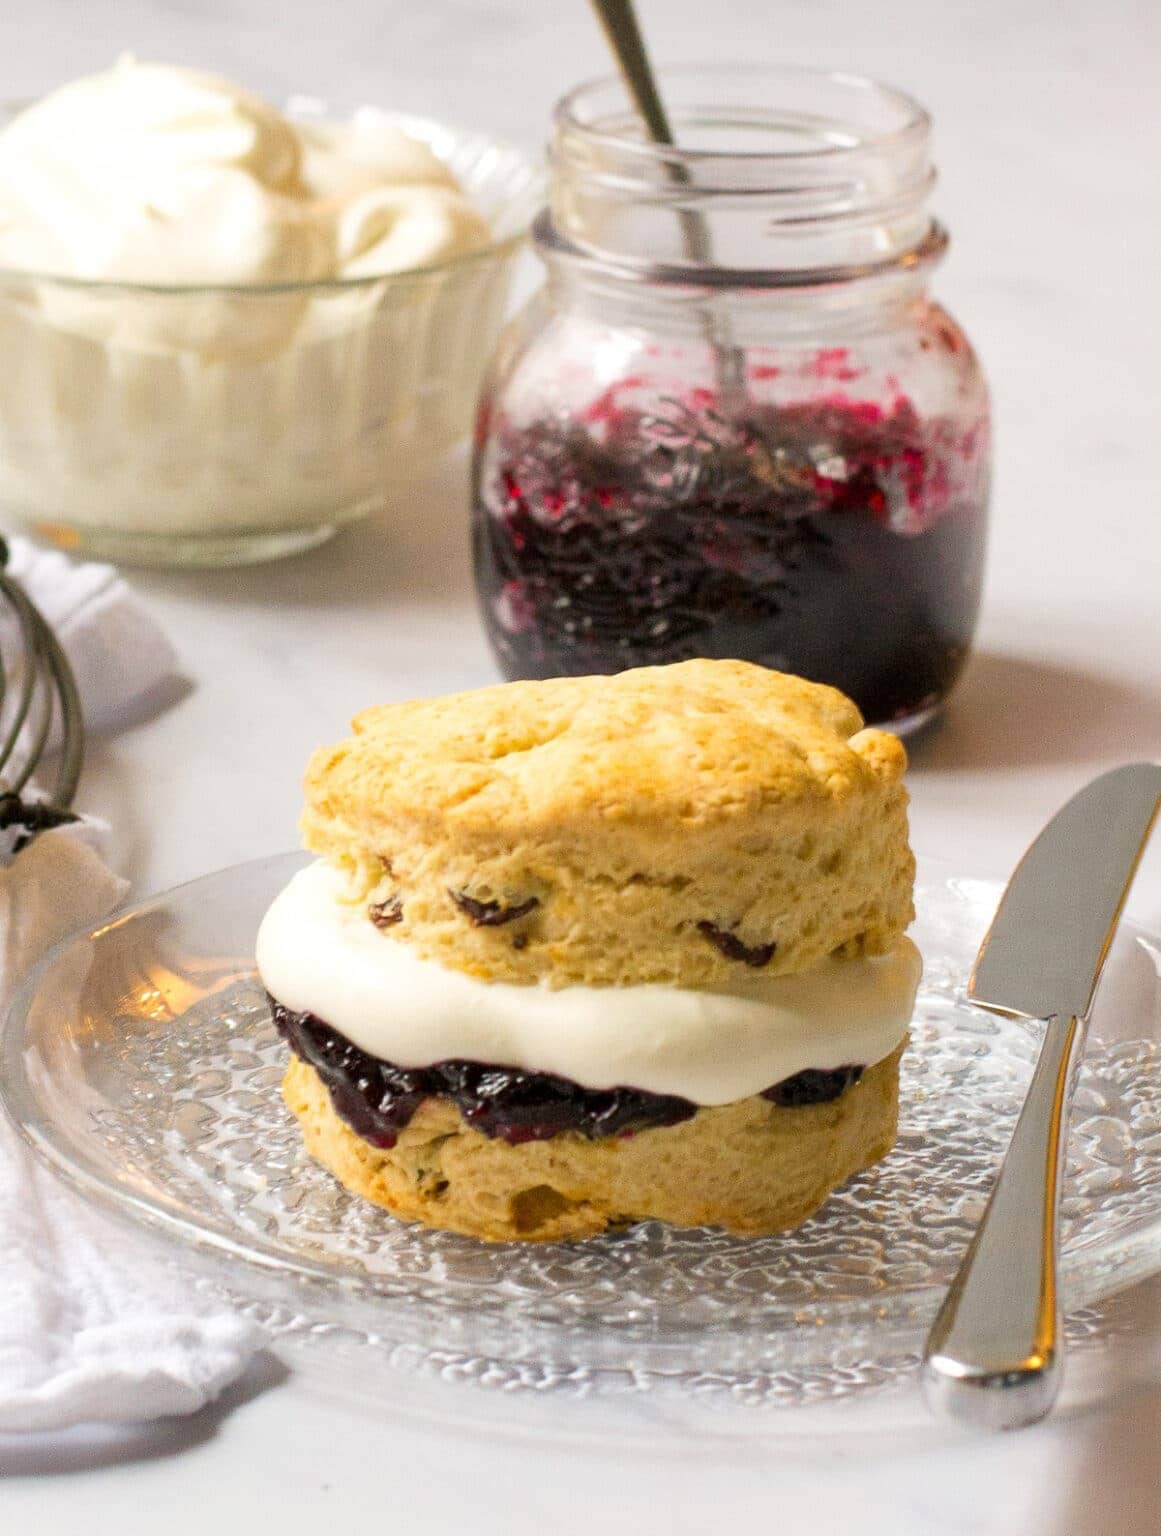 Scone with blueberry and cream filling. 